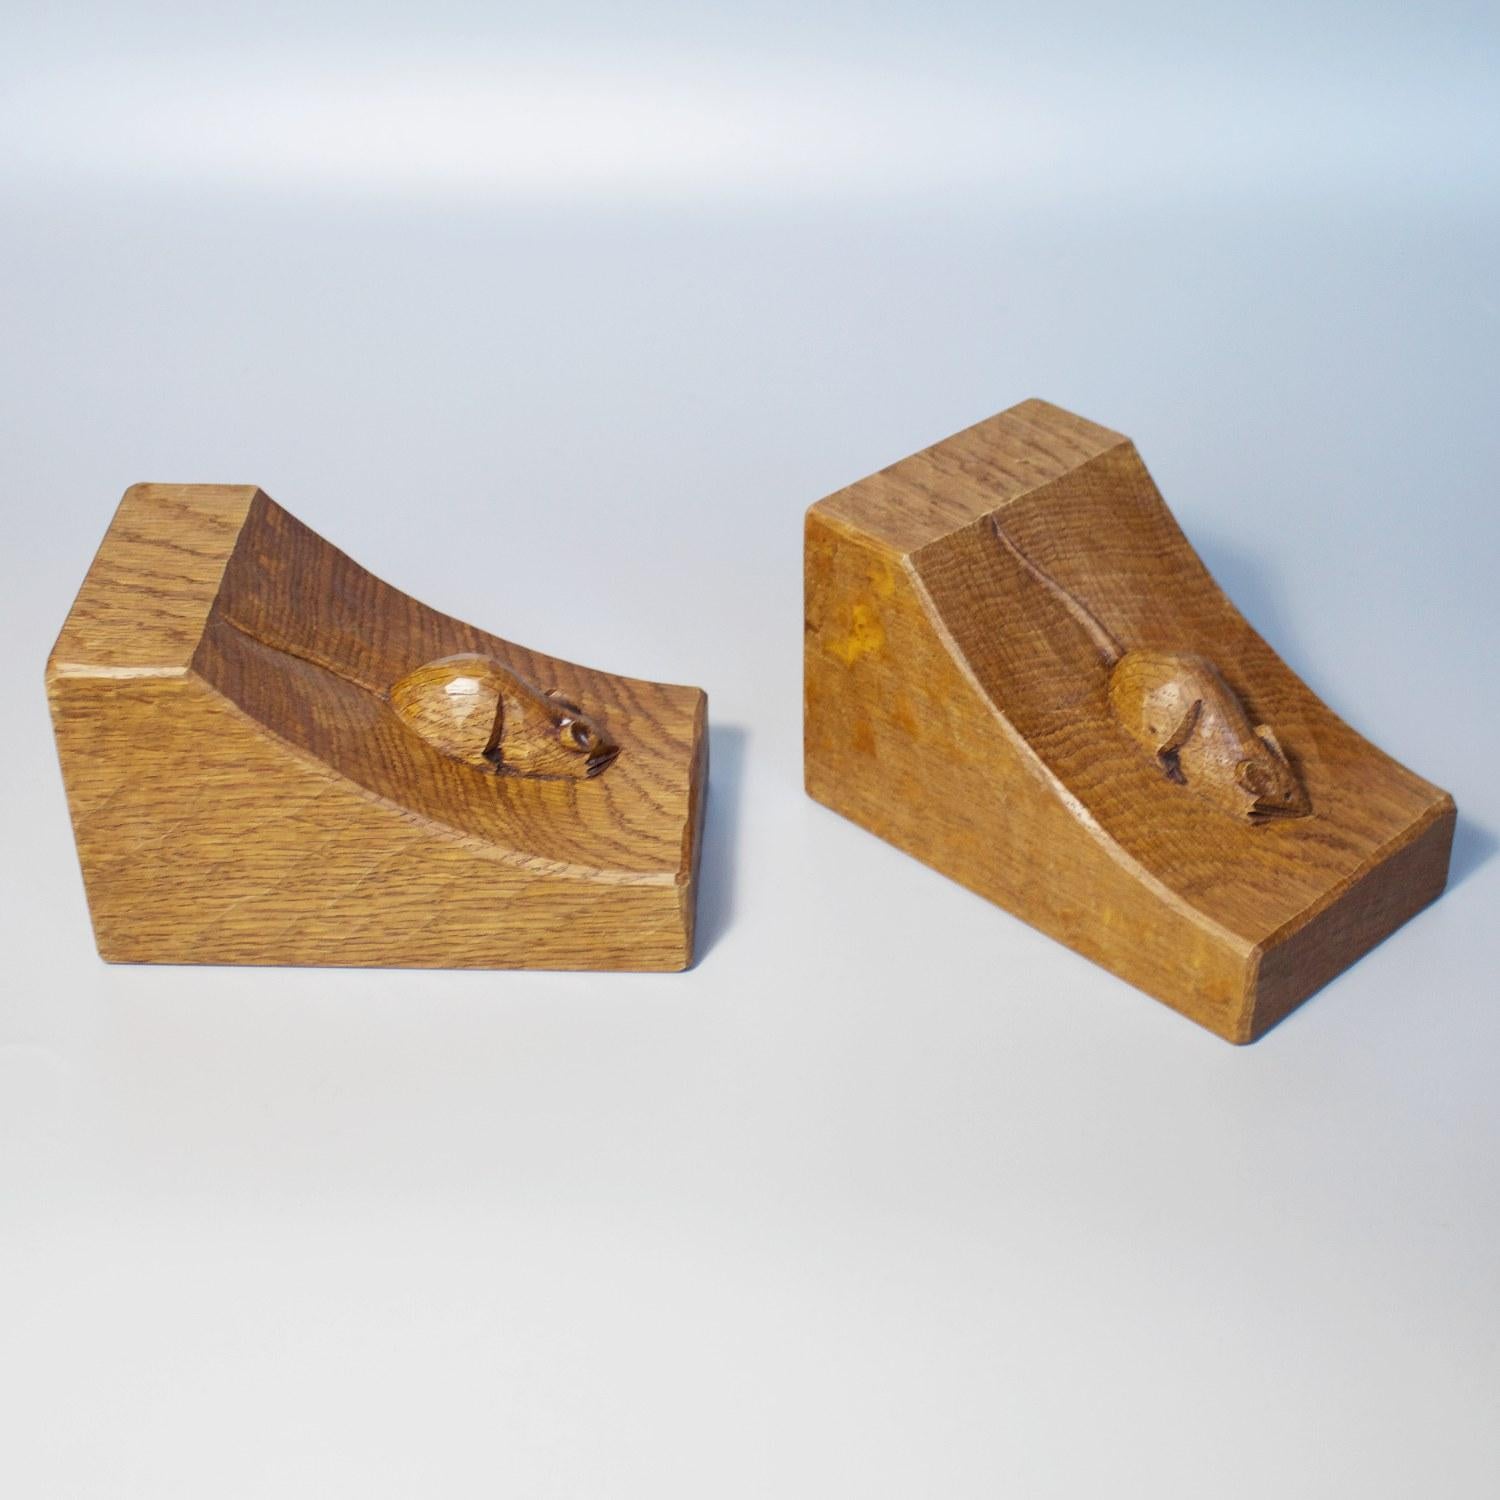 English Pair of Carved Oak Bookends by Robert 'Mouseman' Thompson 